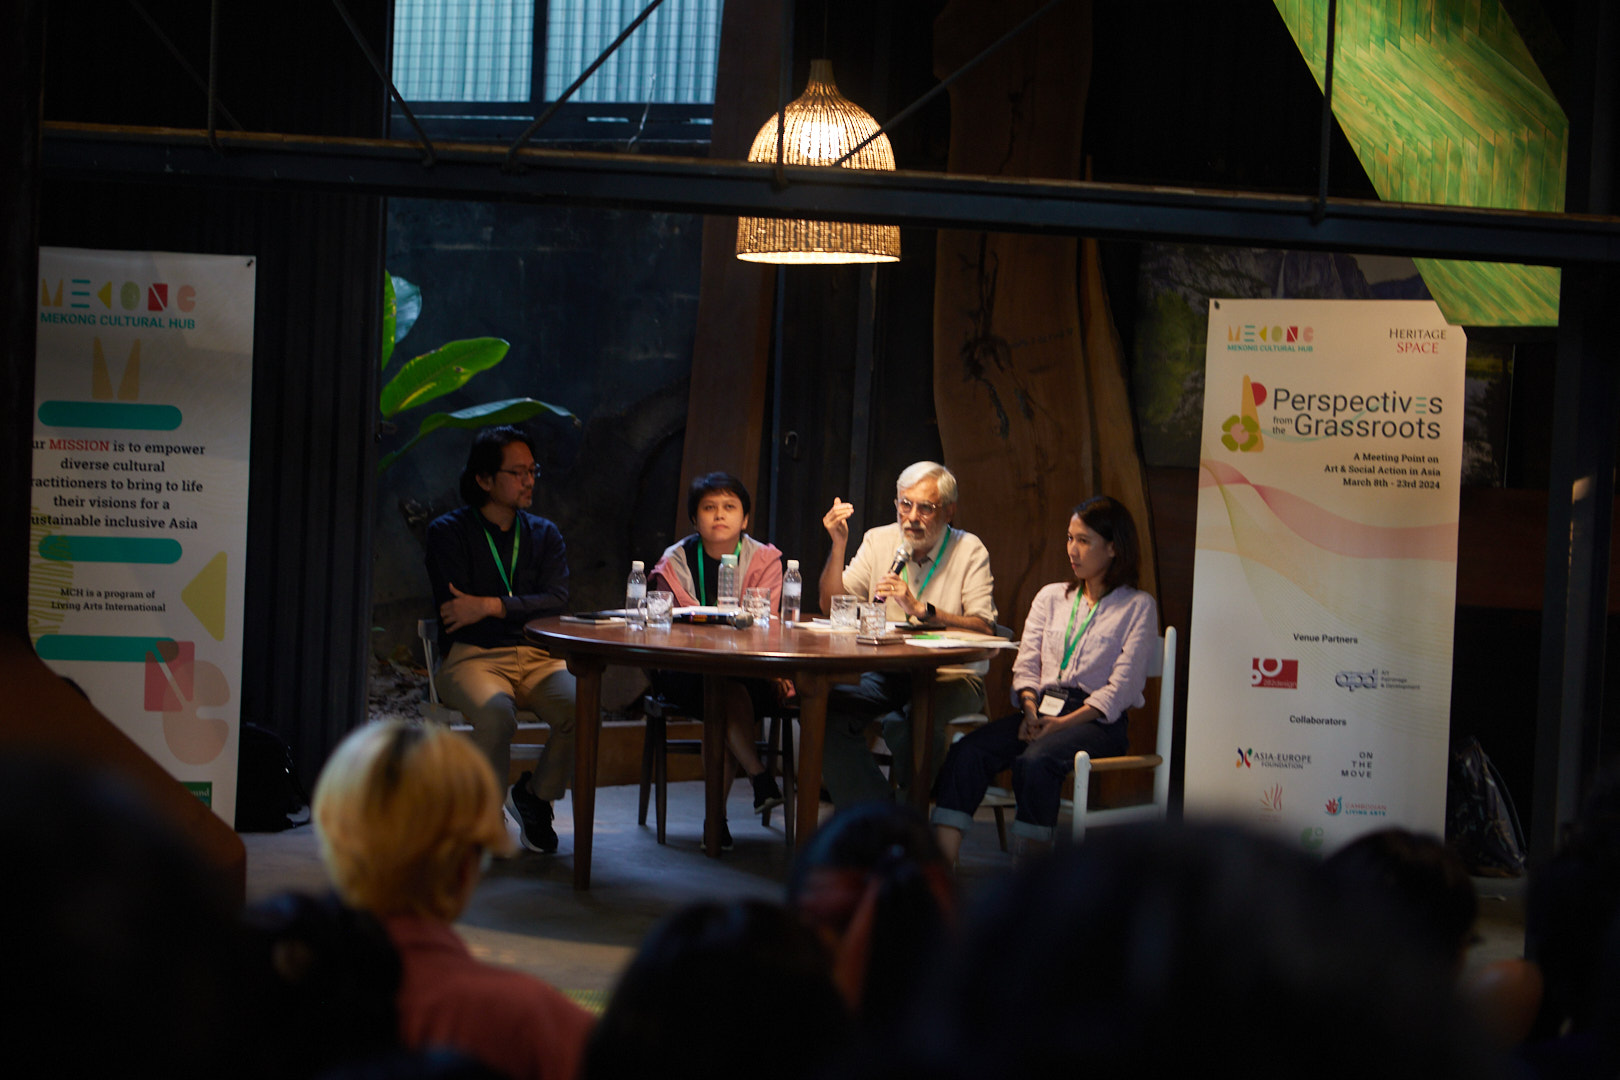 Are Grassroots Cultural Practices in Asia Inherently Unsustainable?